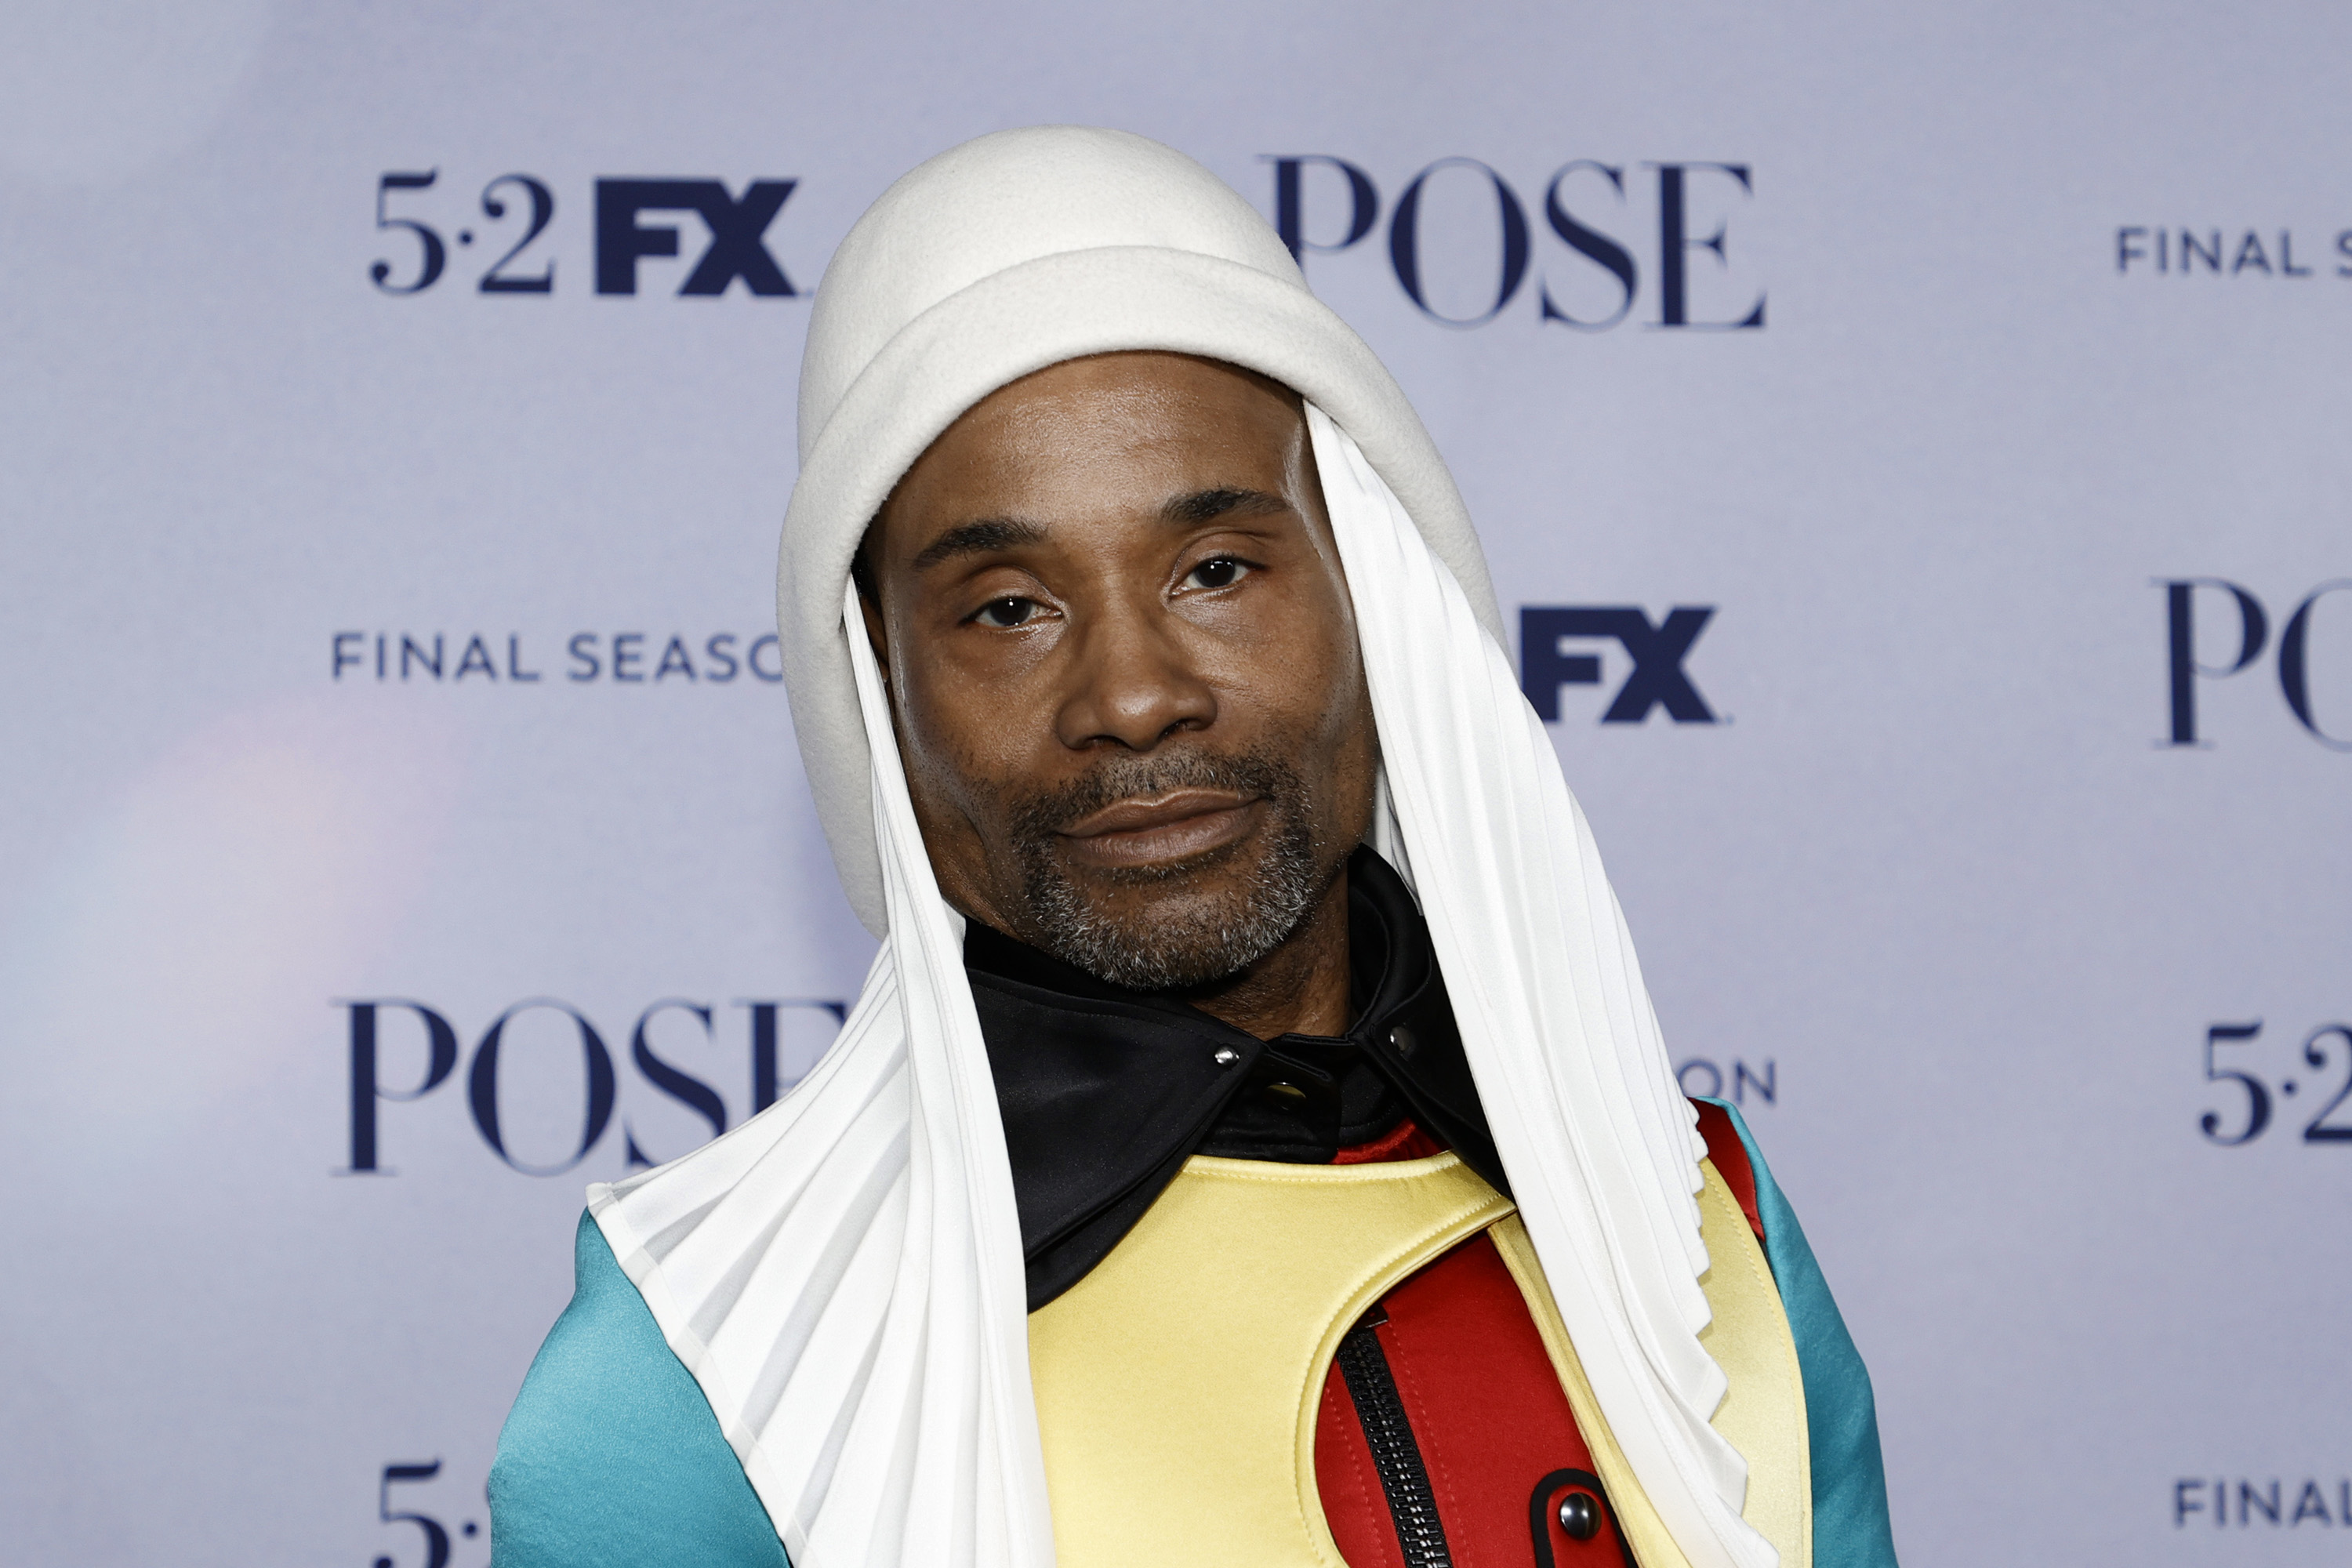 Billy Porter Reveals HIV Status: “I’m Doing This For Me”